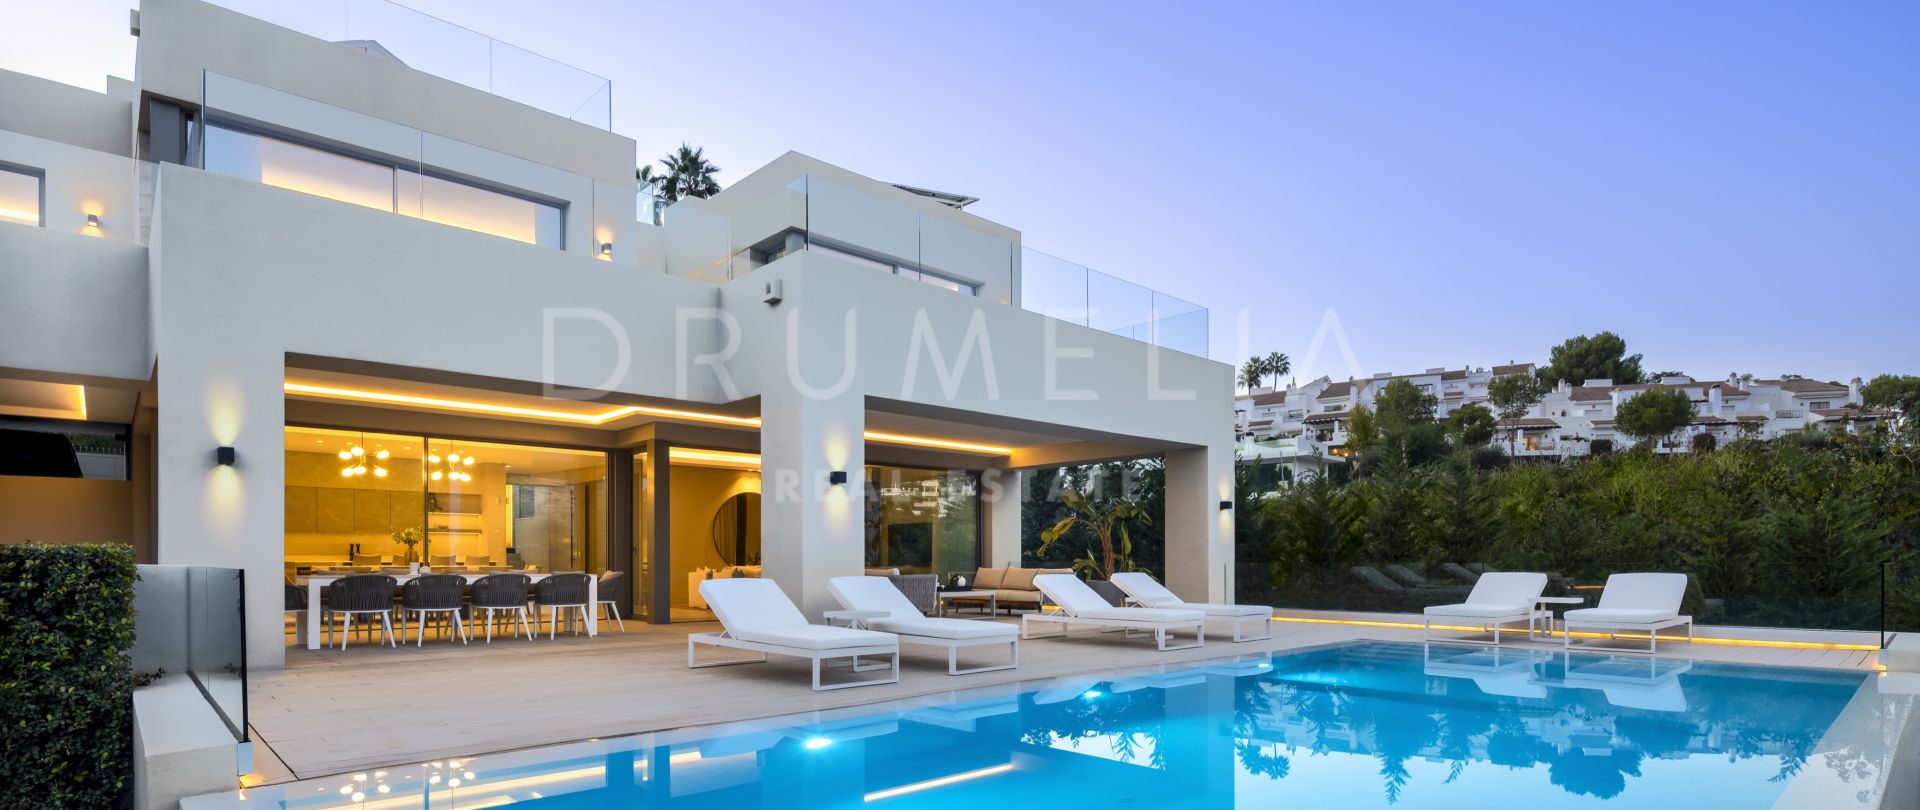 Villa Miranda: modern high-end house with luxurious amenities and La Concha views in Nueva Andalucia